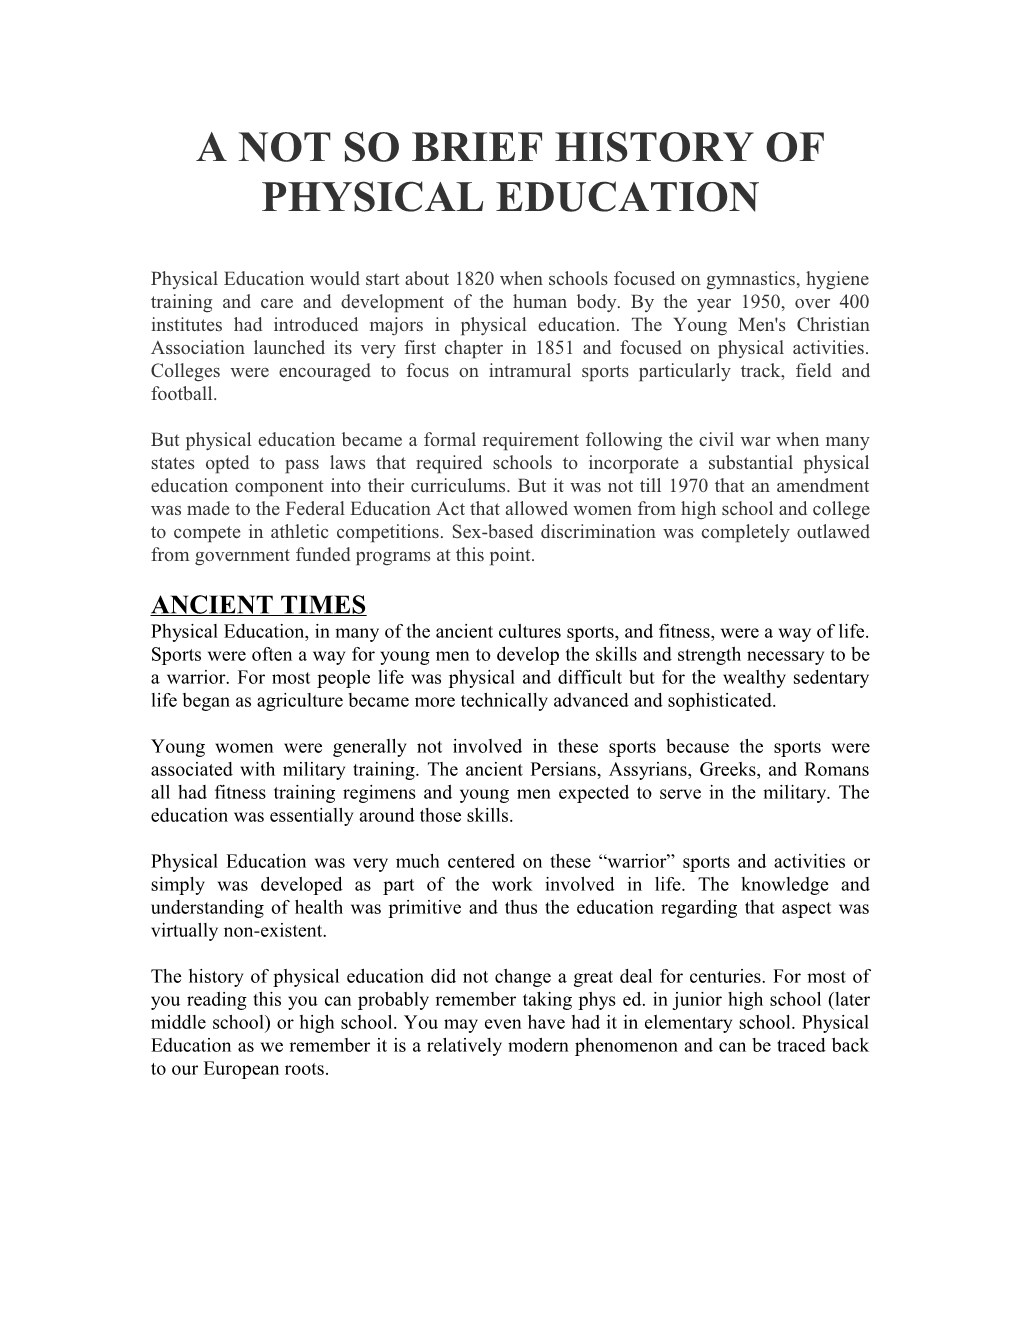 A Not So Brief History of Physical Education